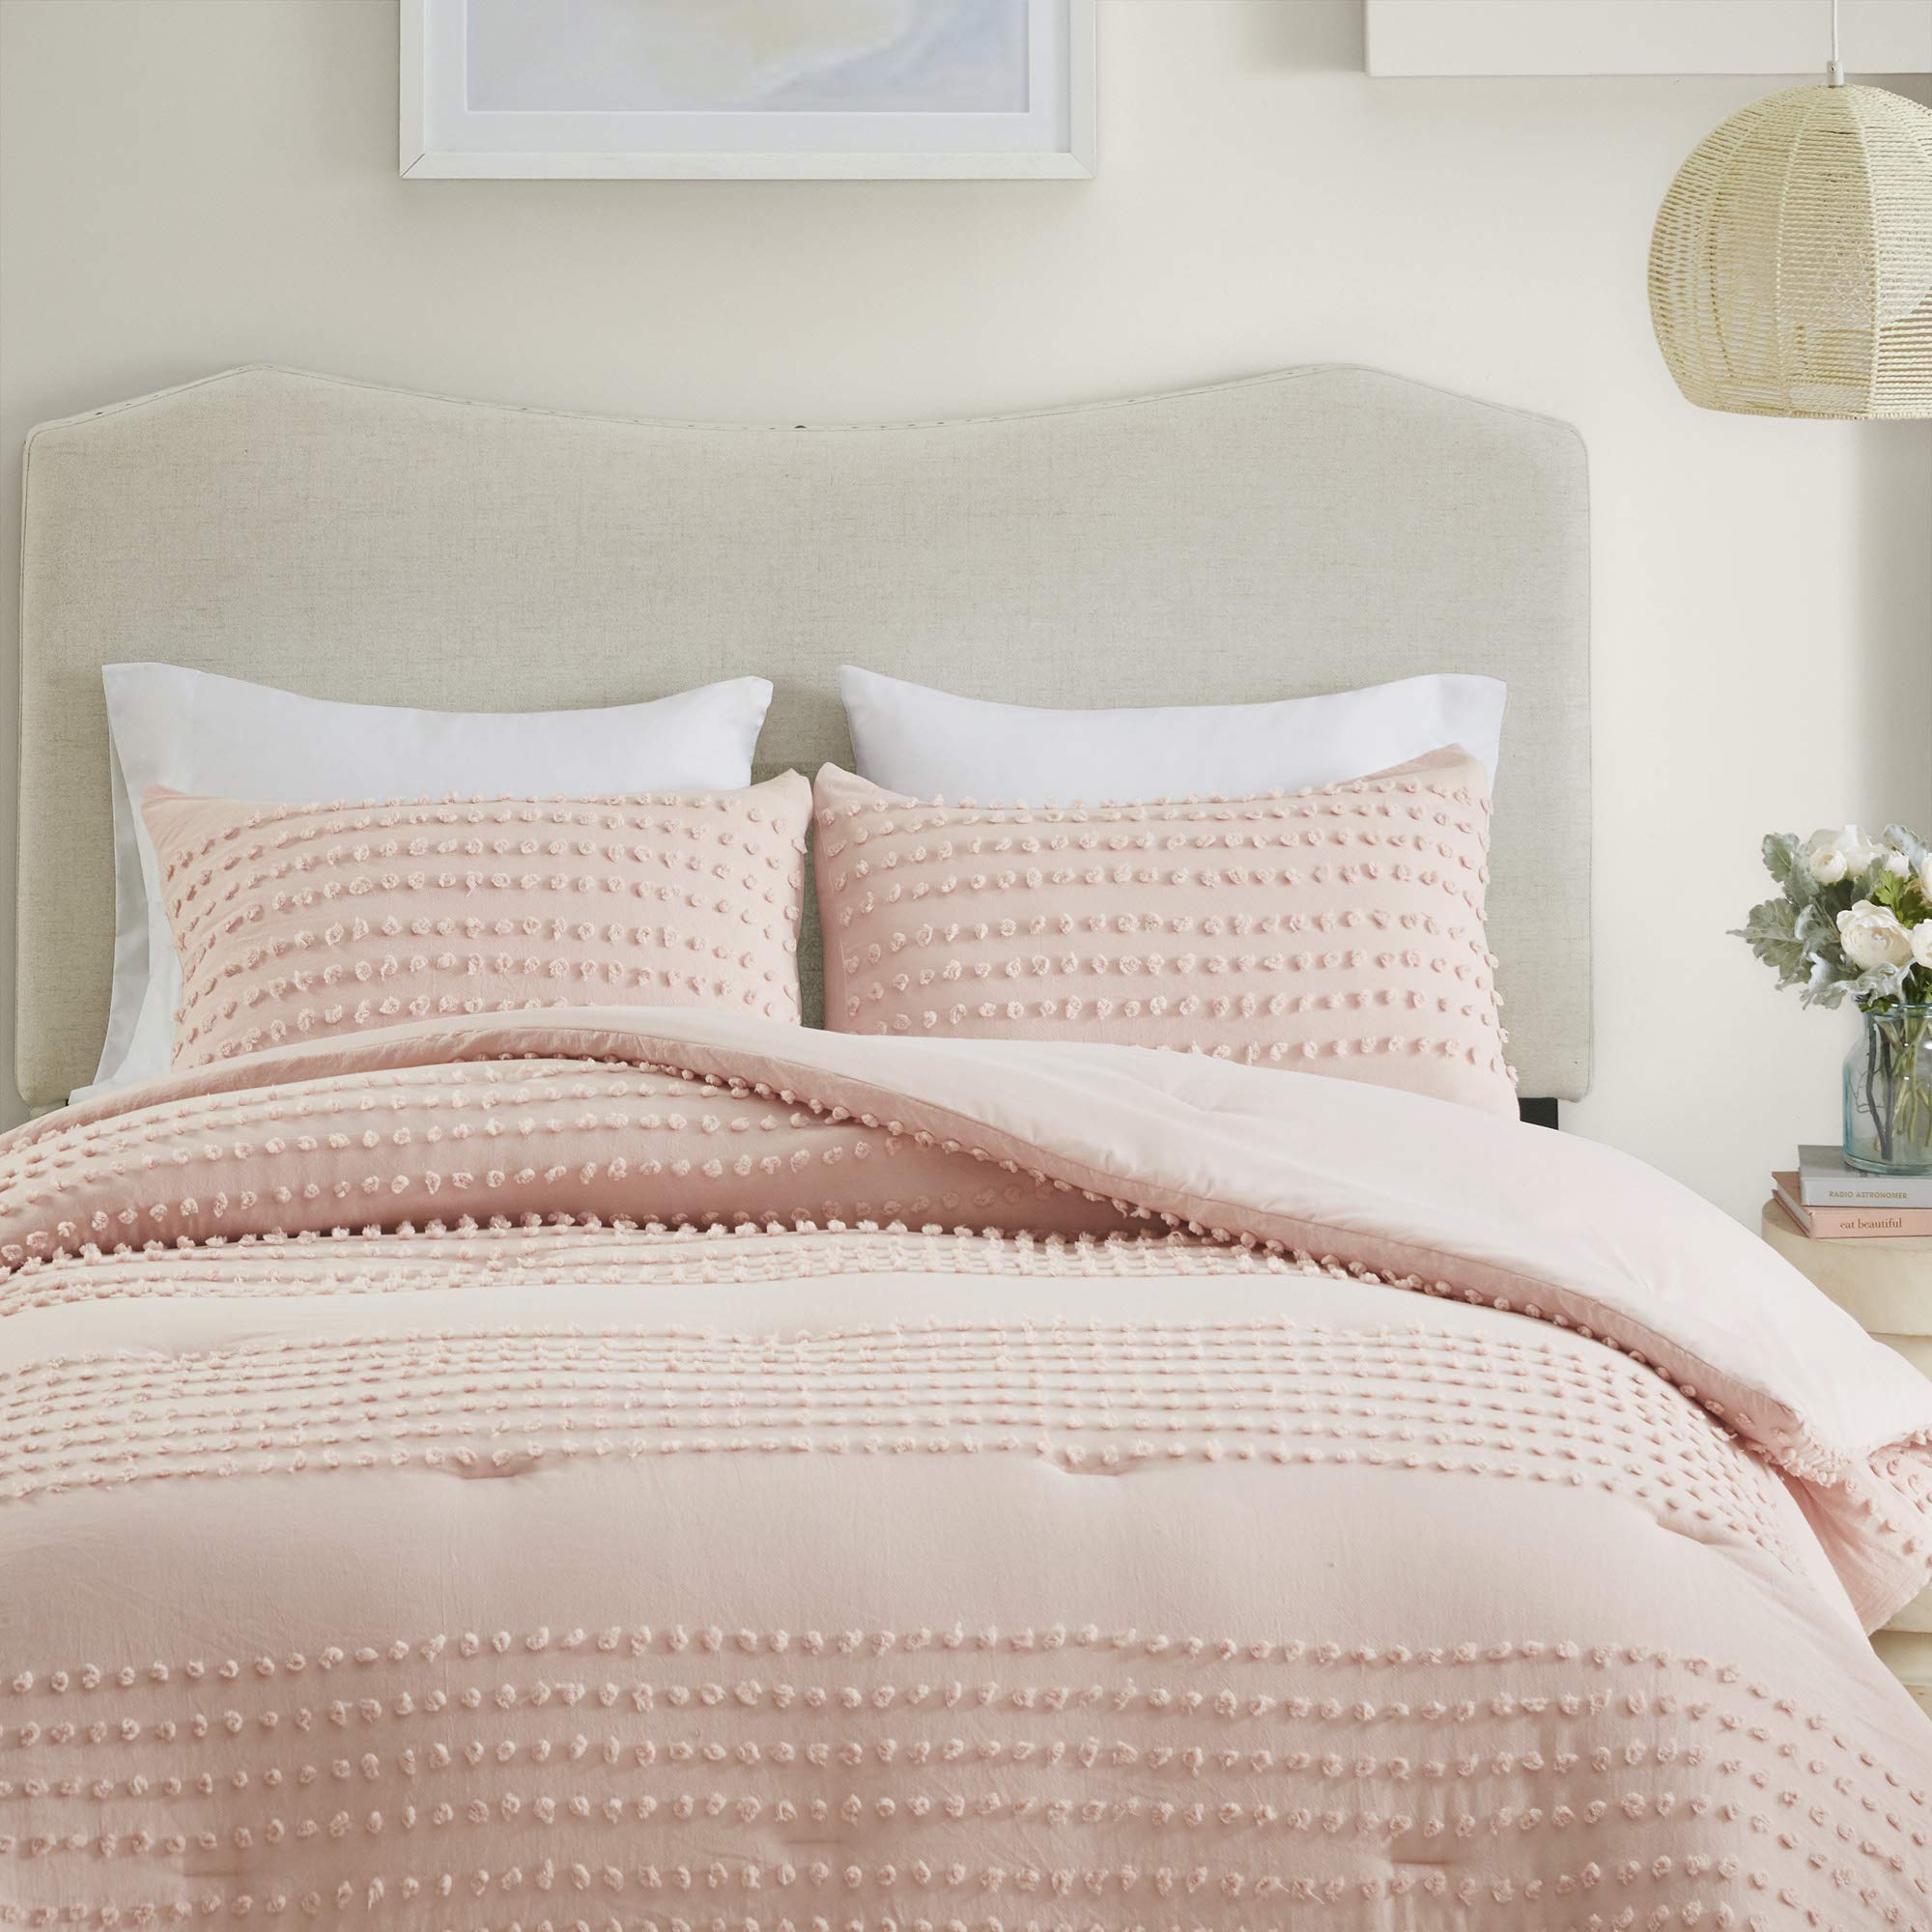 Book Cover Comfort Spaces 100% Comforter Set Cotton Jacquard Pom Tufts Design Hypoallergenic Down Alternative, All Season Modern Bedding, Matching Shams, Twin/Twin XL, Phillips, Blush Twin/Twin XL Phillips, Blush